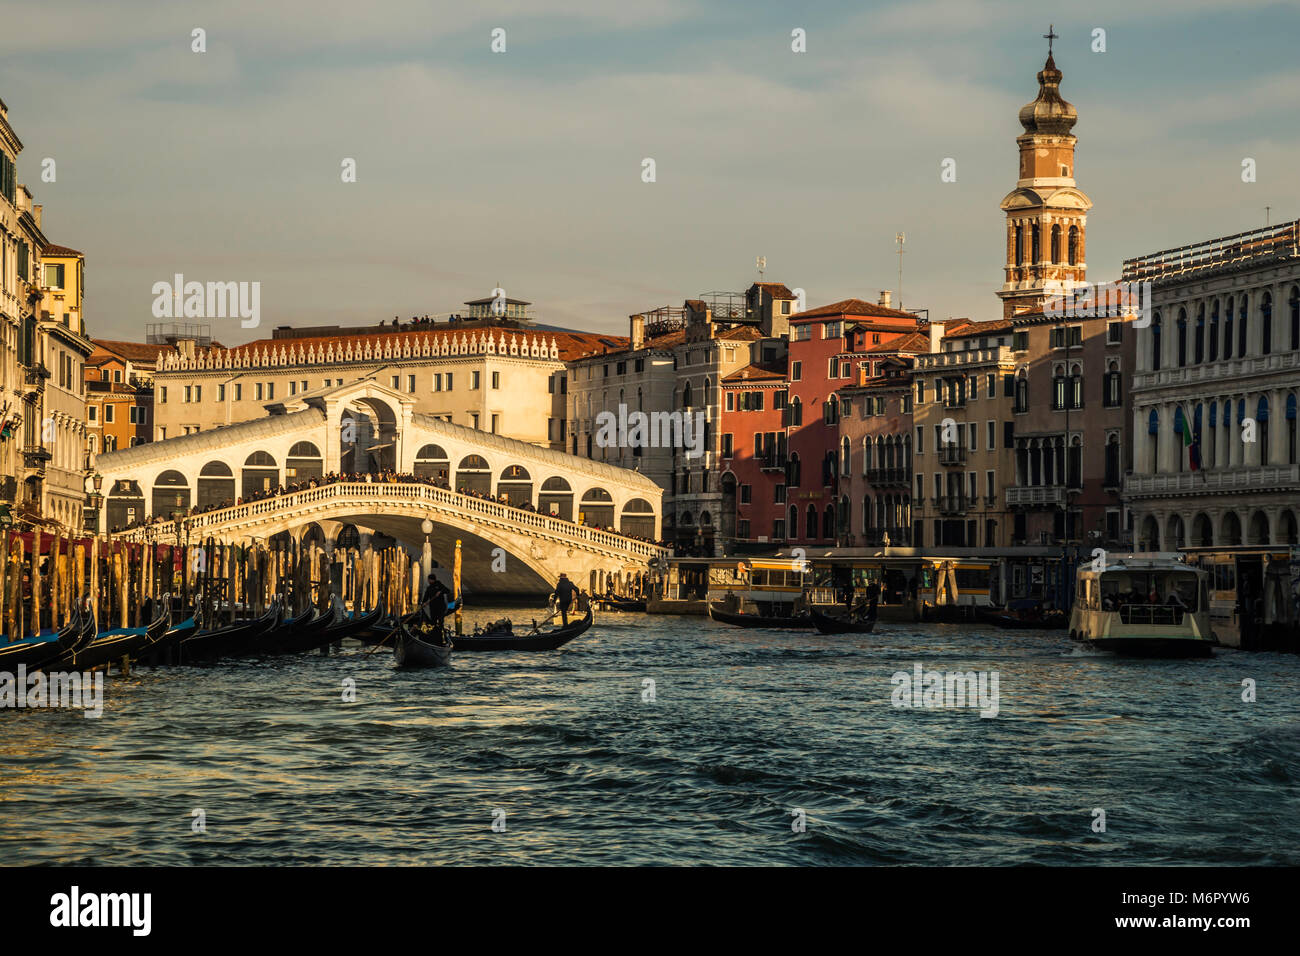 Wonderful view of Grand Canal and palaces during sunset, Venice, Italy. Stock Photo